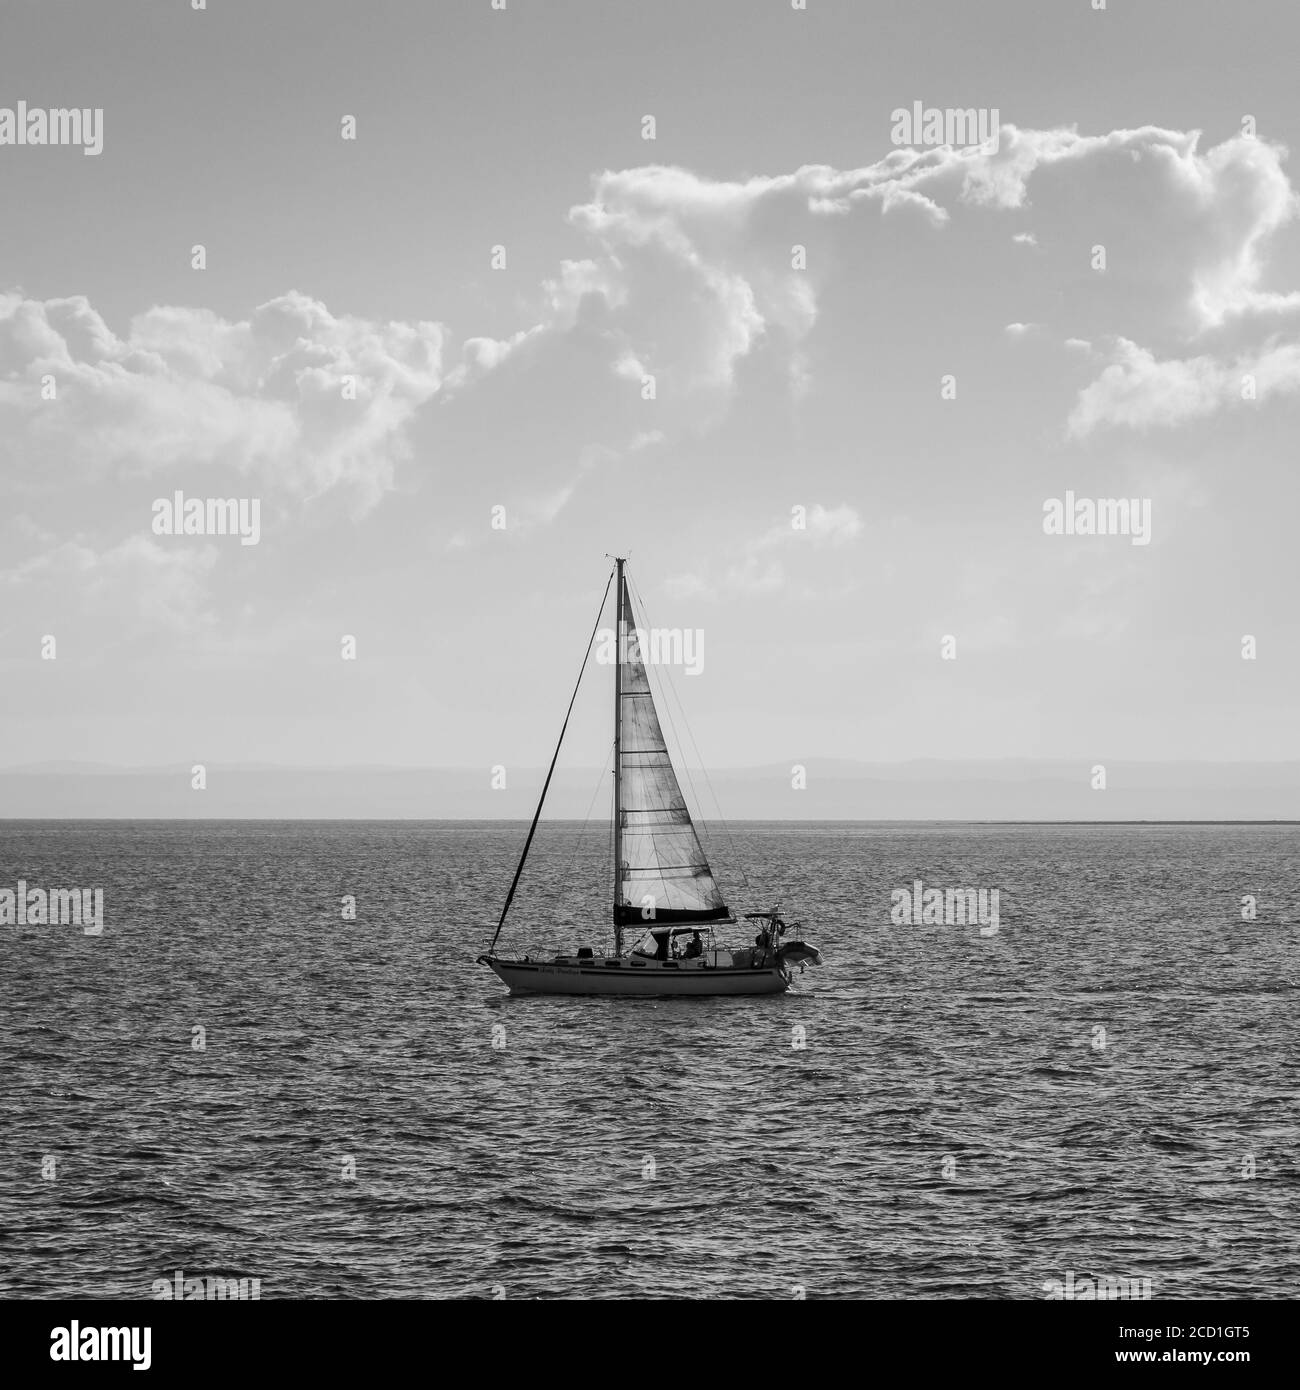 Sail boat Black and White Stock Photos & Images - Alamy